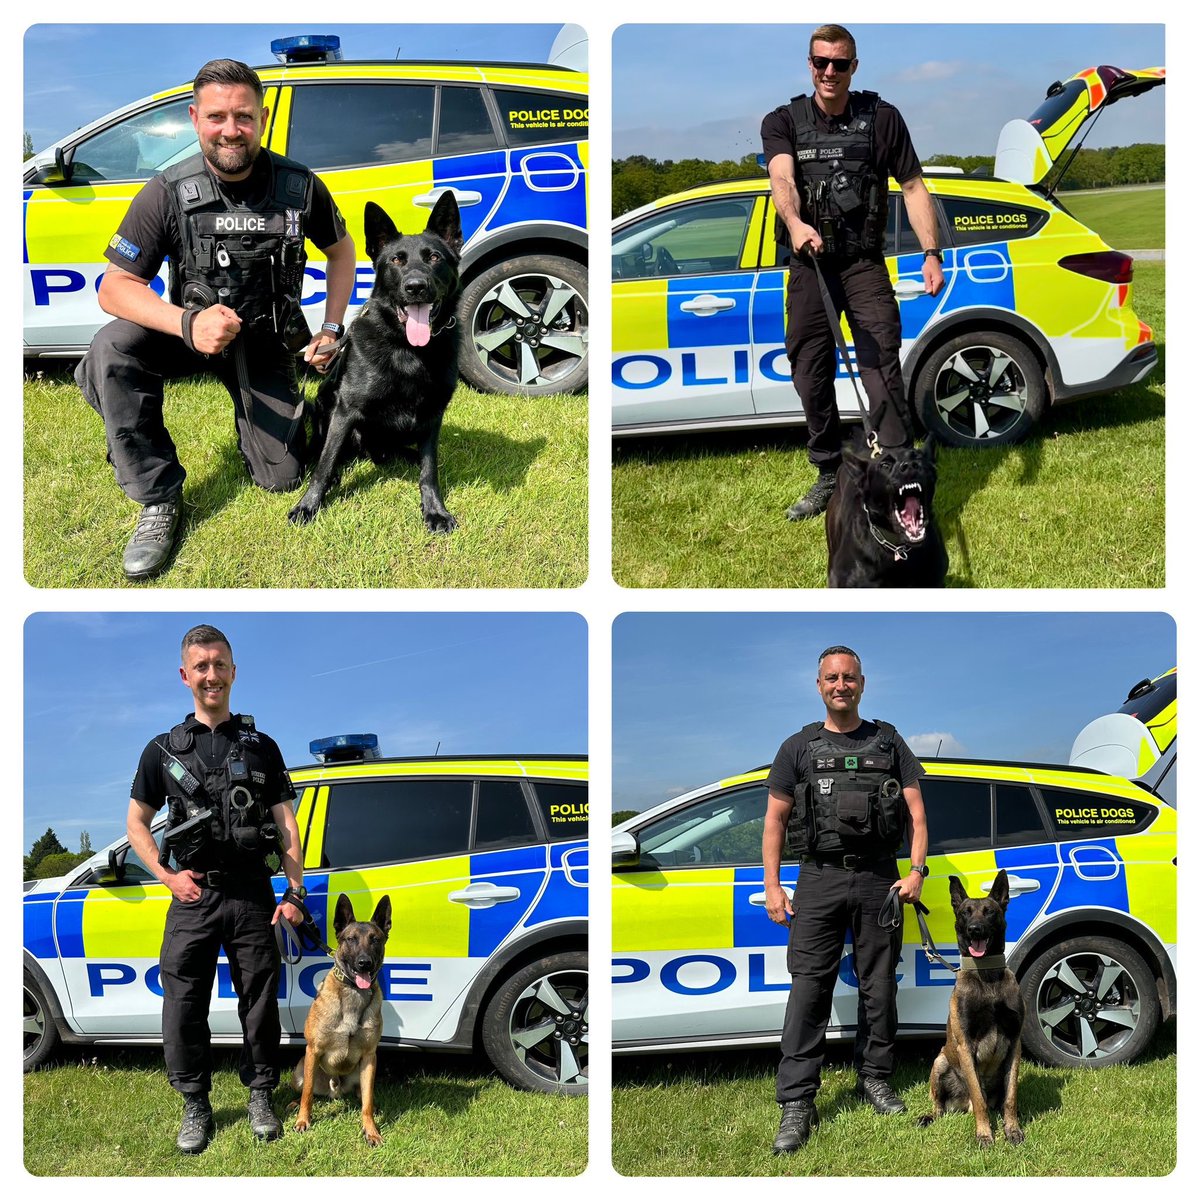 Congratulations to PD Vandal and PC Banks, PD Freya and PC Shawcross, PD Tag and PC Evans and PD King and PC Cross who all passed their initial licensing today! They’ll all be out and about across Cheshire and North Wales very soon!